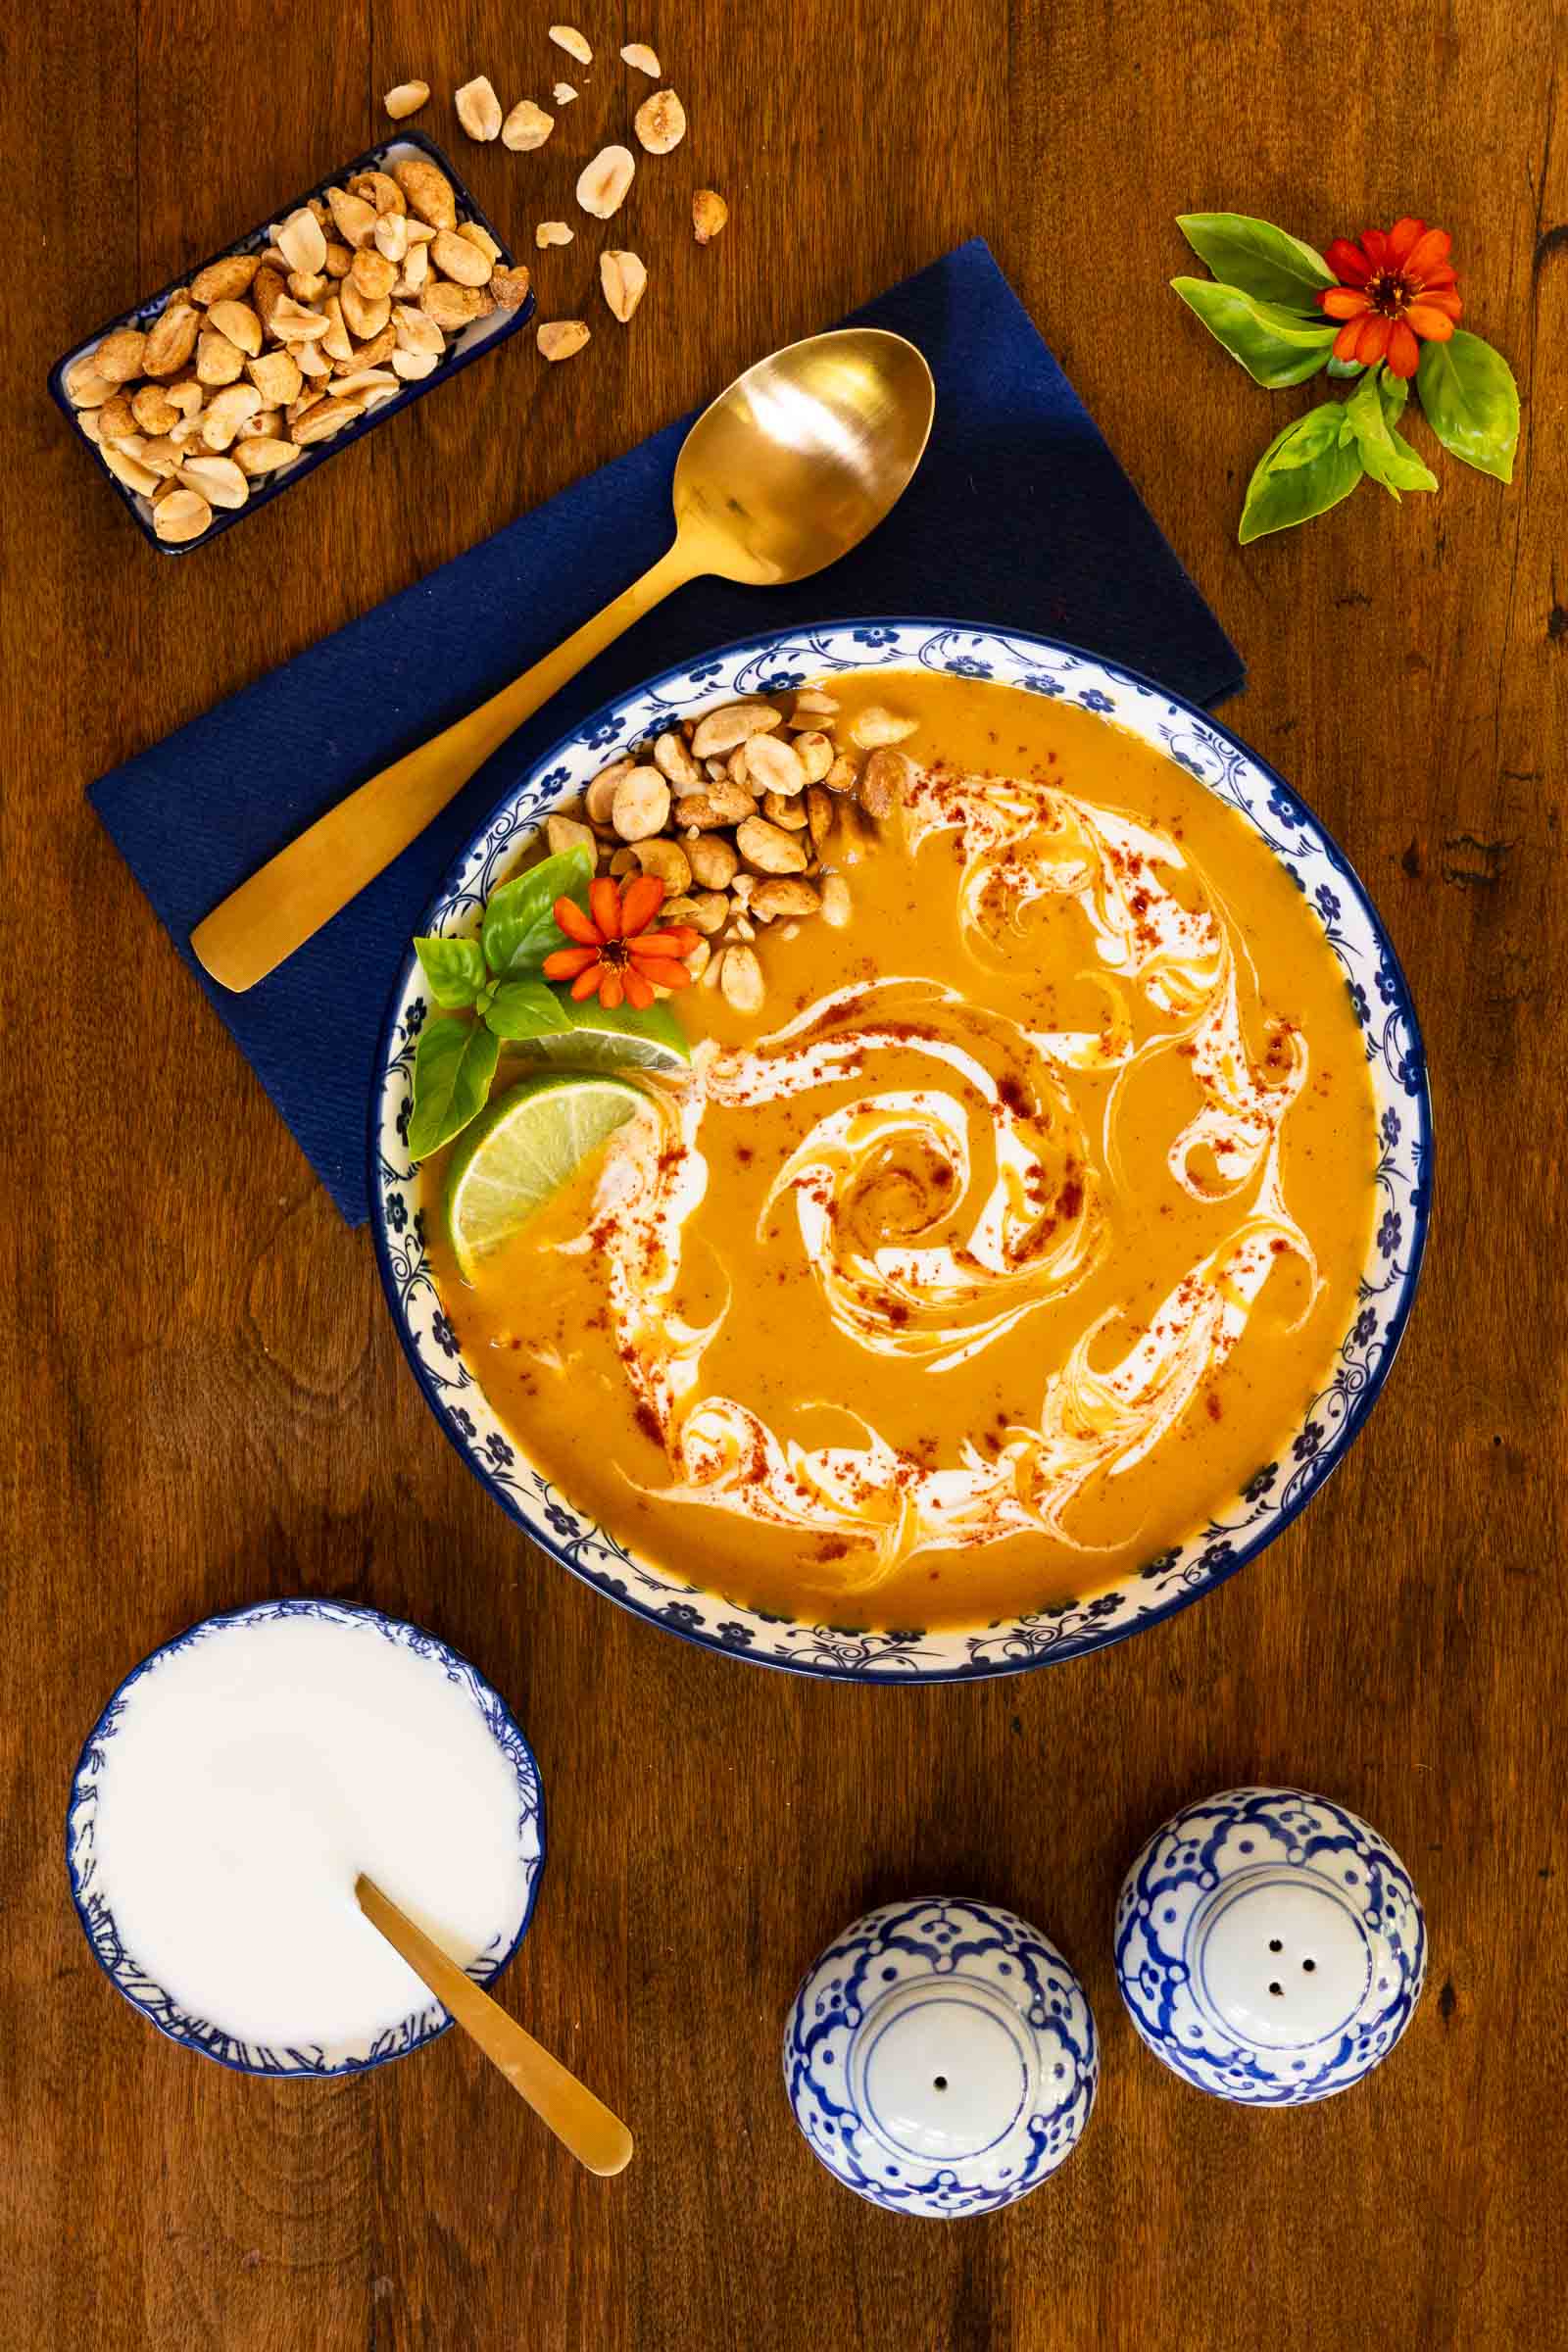 Vertical overhead photo of a bowl of Roasted Sweet Potato Soup garnished with sour cream, basil leaves, peanuts and lime wedges.